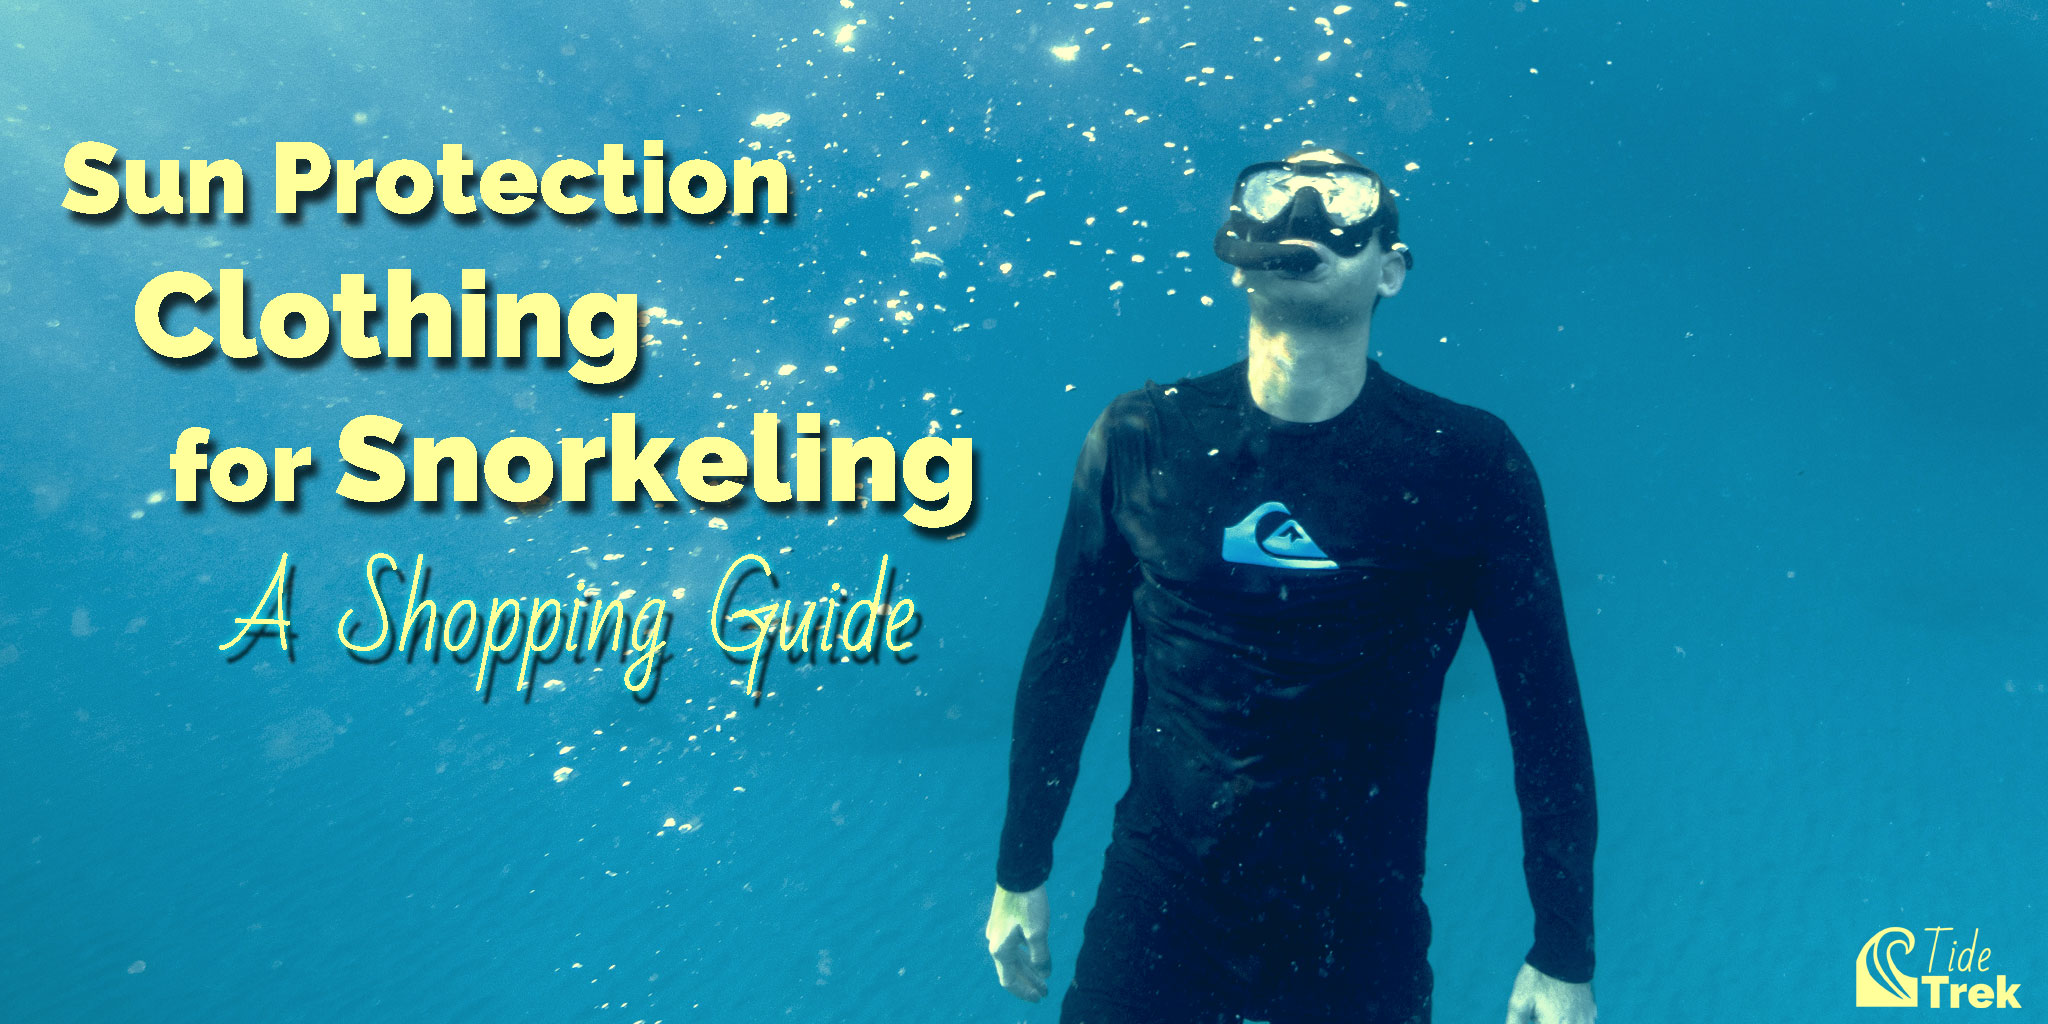 Sun Protection Clothing for Snorkeling: A Shopping Guide